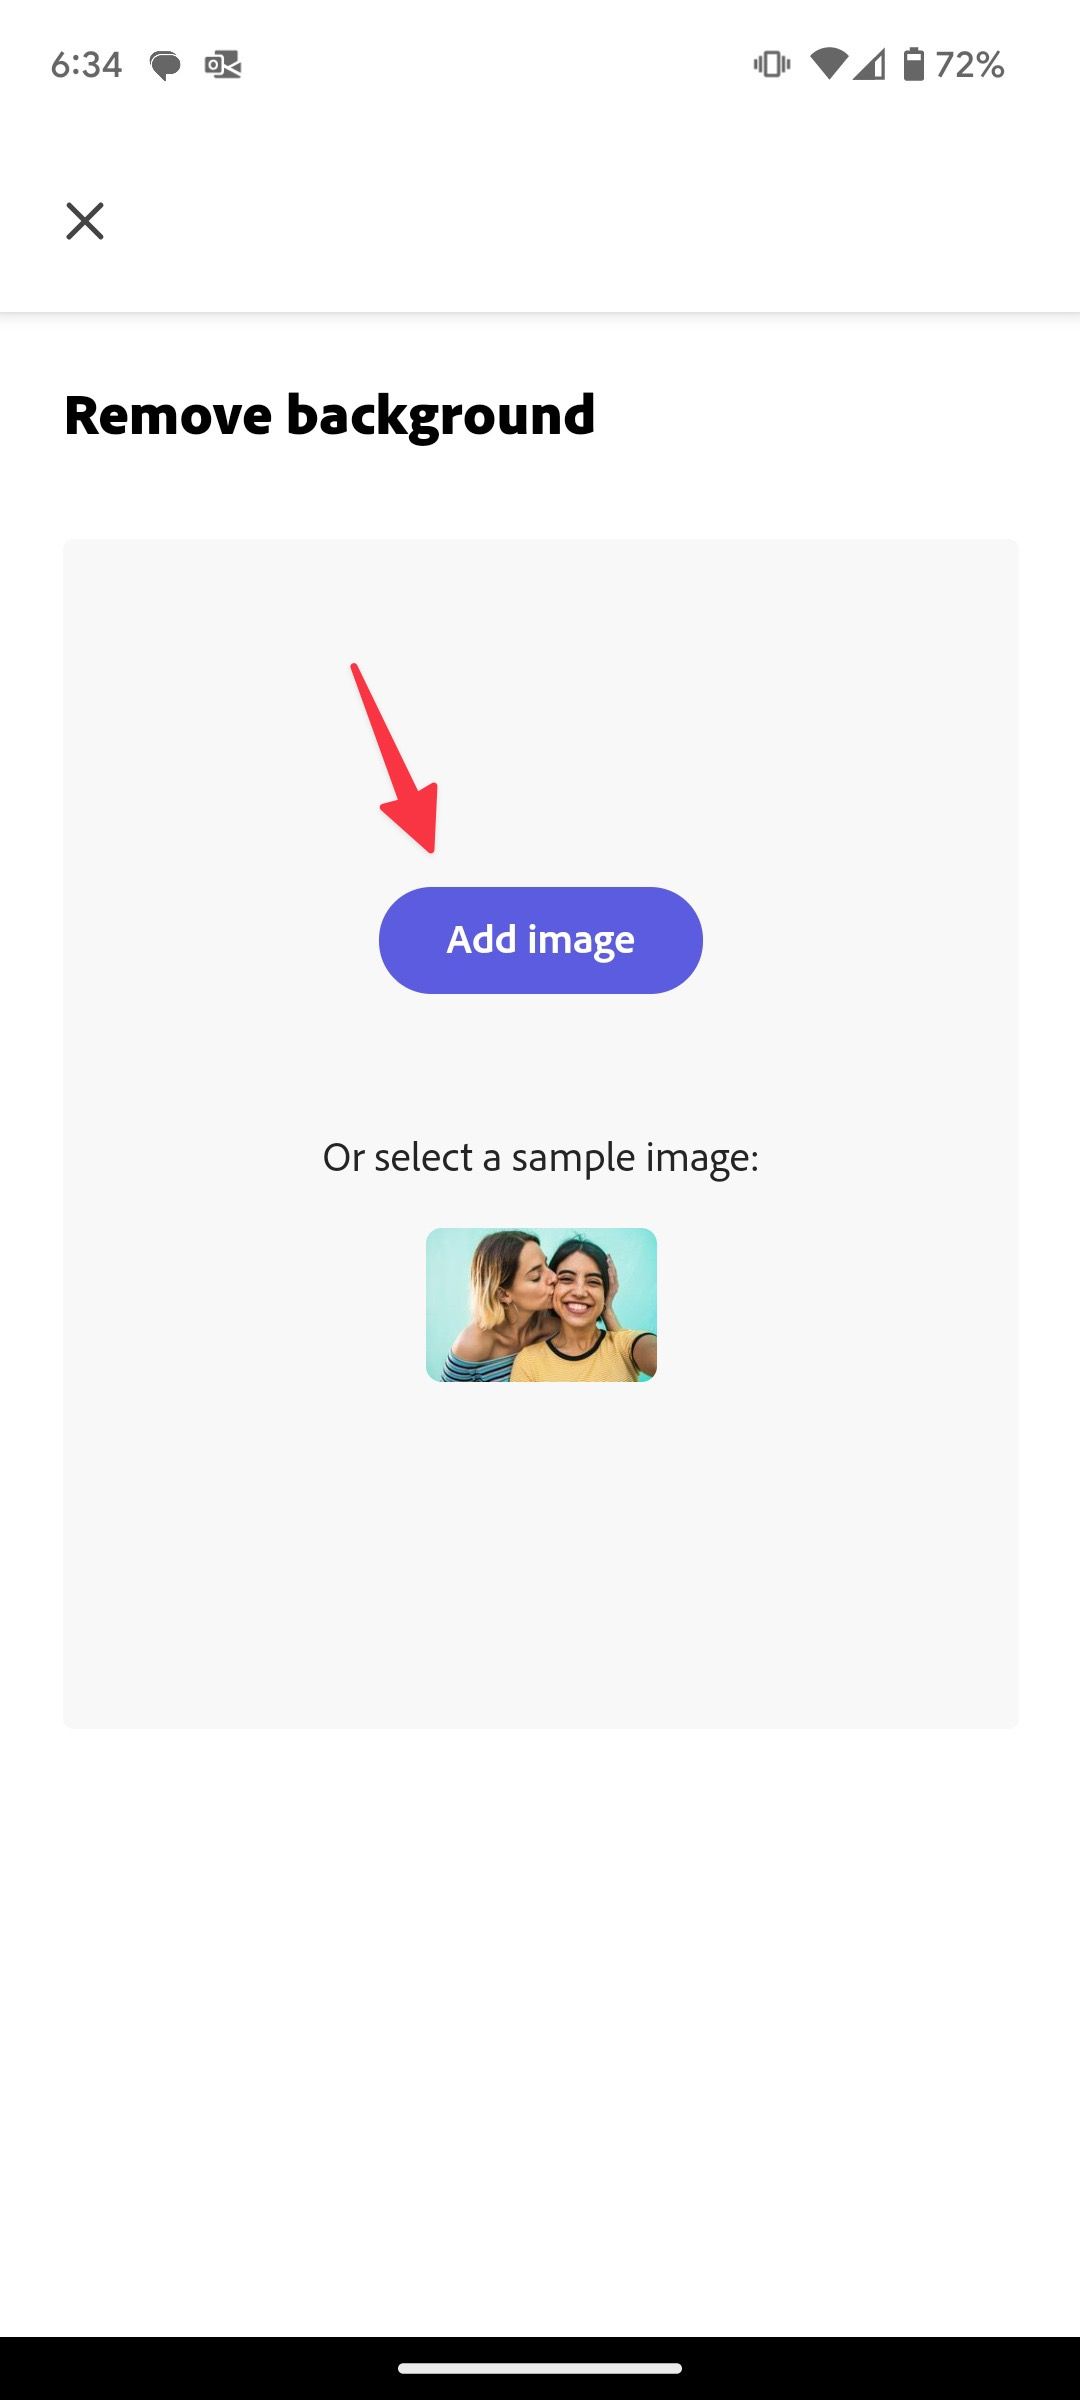 add an image in Adobe Express